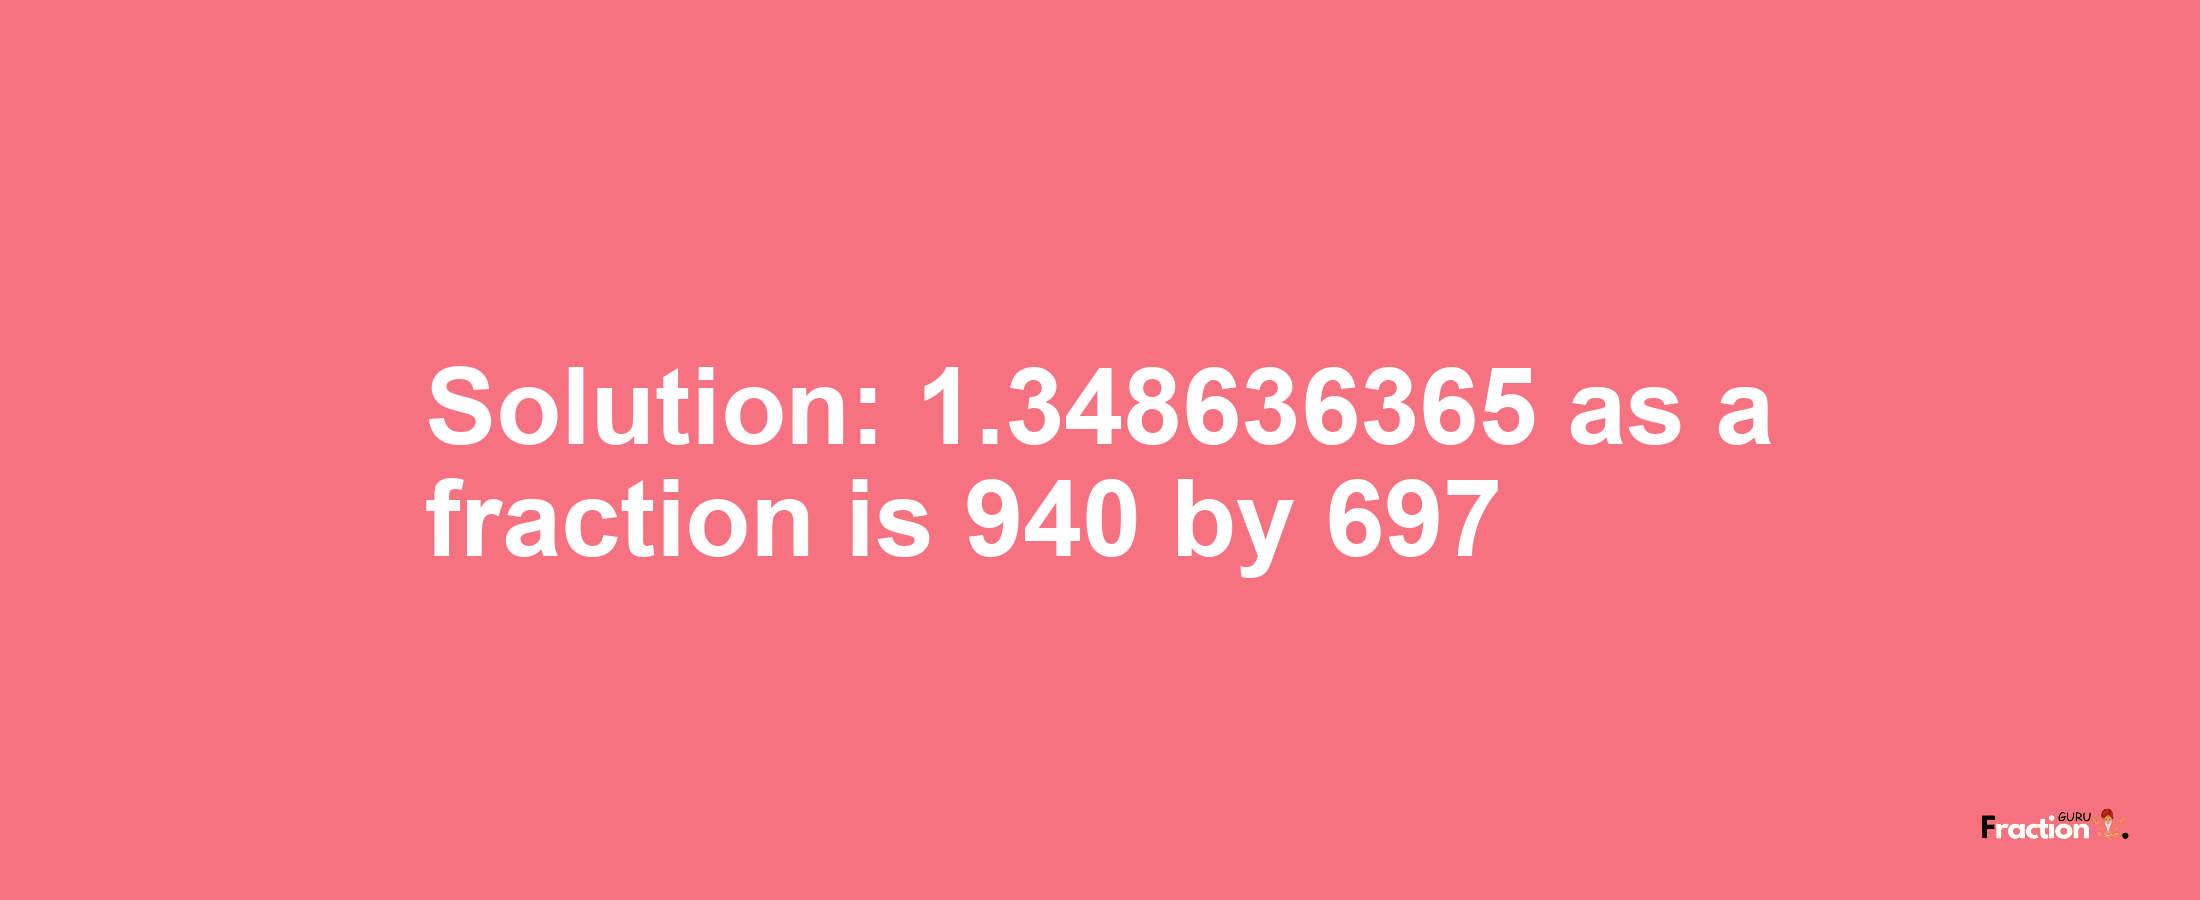 Solution:1.348636365 as a fraction is 940/697